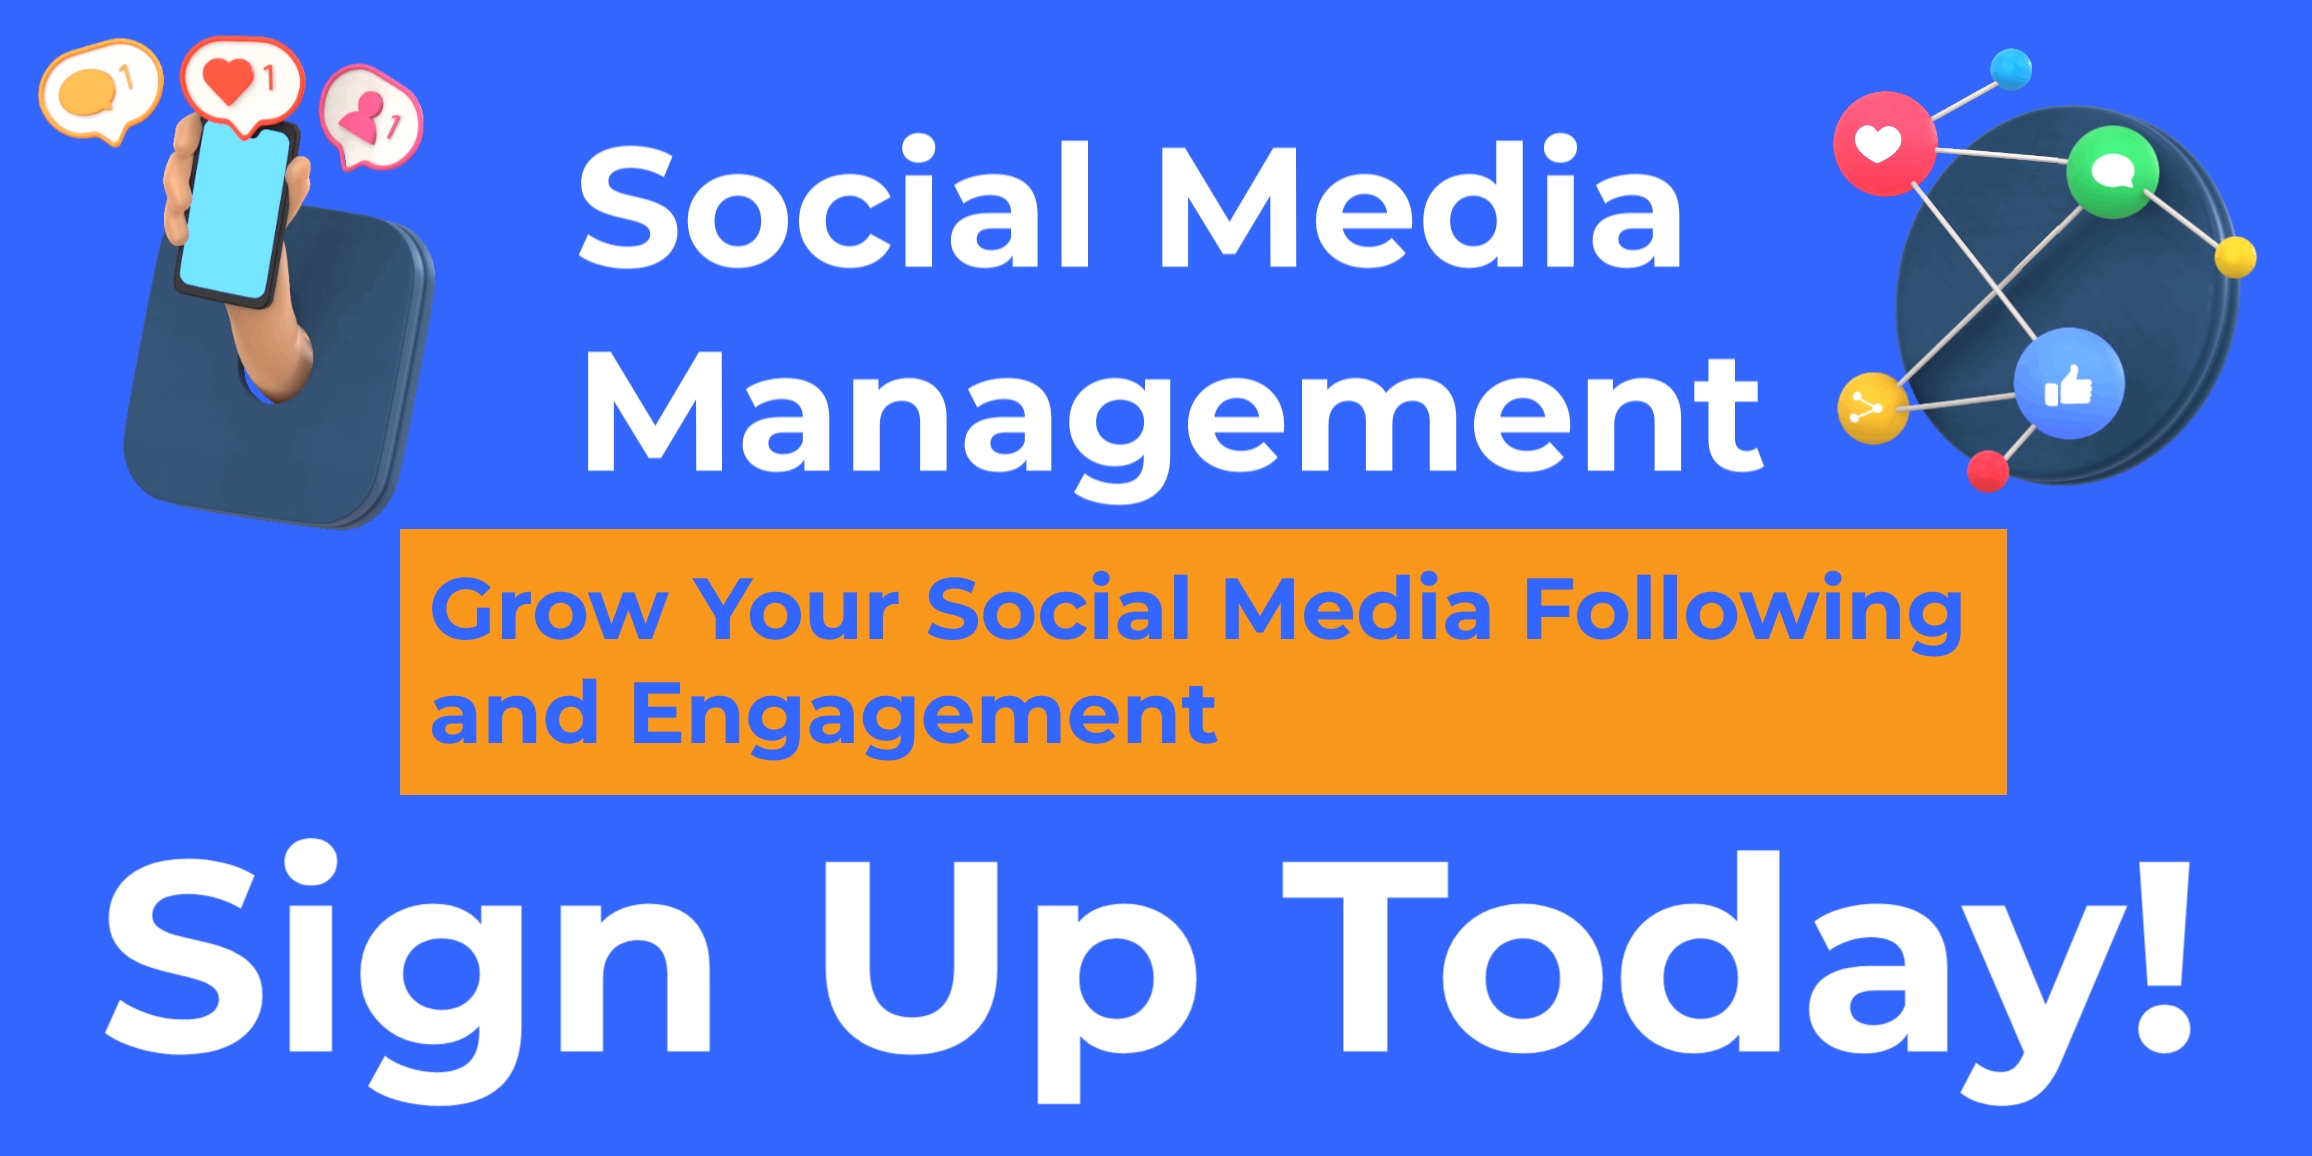 Grow Your Social Media Following and Engagement